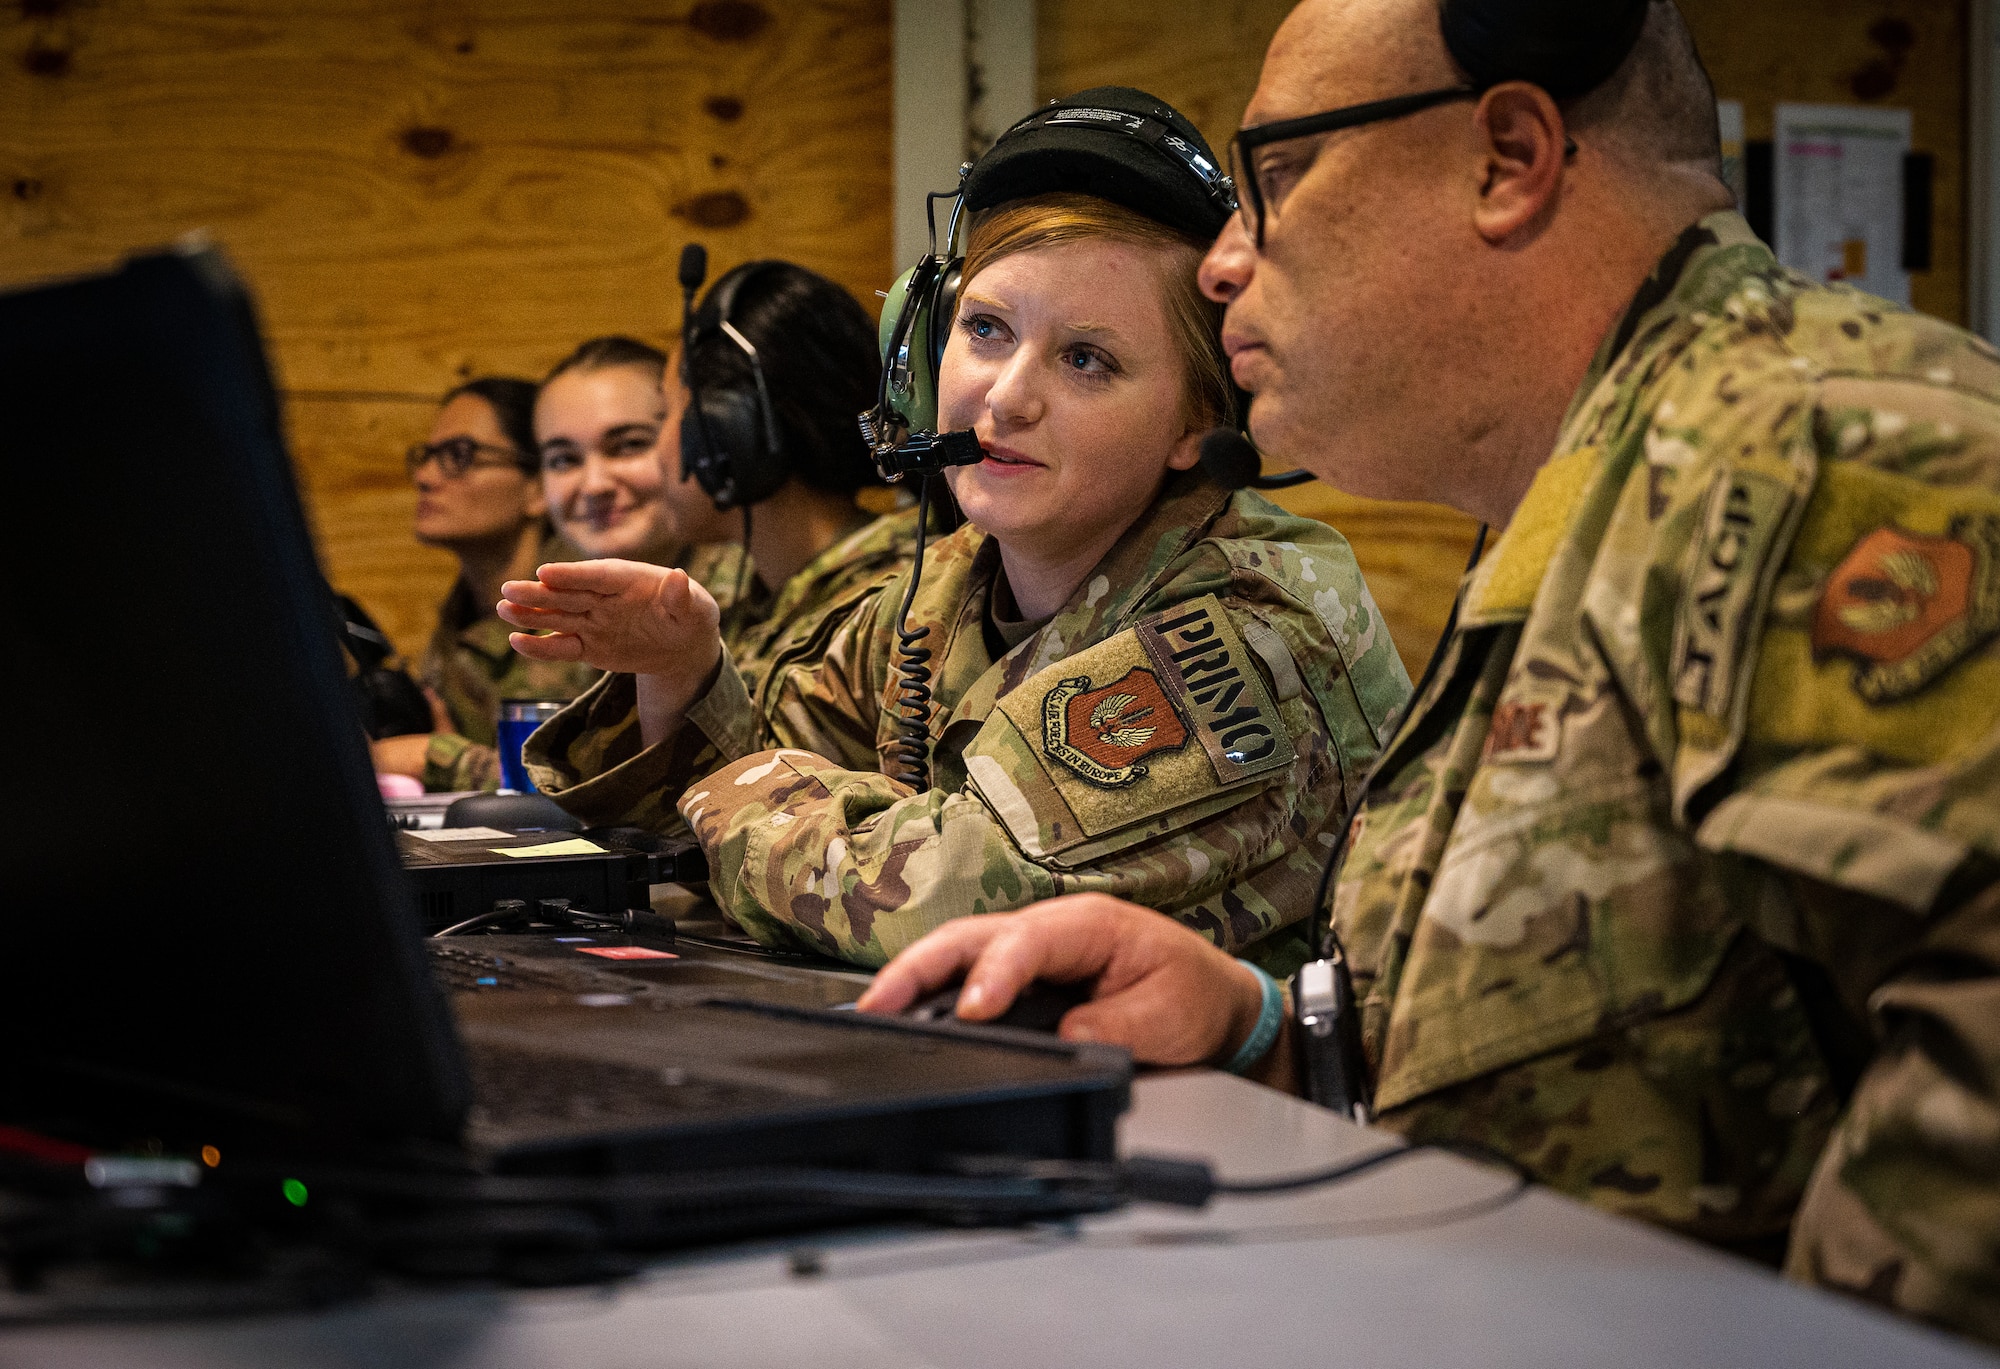 U.S. Air Force Tactical Air Control Party operators, assigned to the 4th Air Support Operations Group, work alongside Airmen, assigned to the 606th Air Control Squadron and the 1st Combat Communications Squadron, to monitor air space in Romania, March 6, 2022.